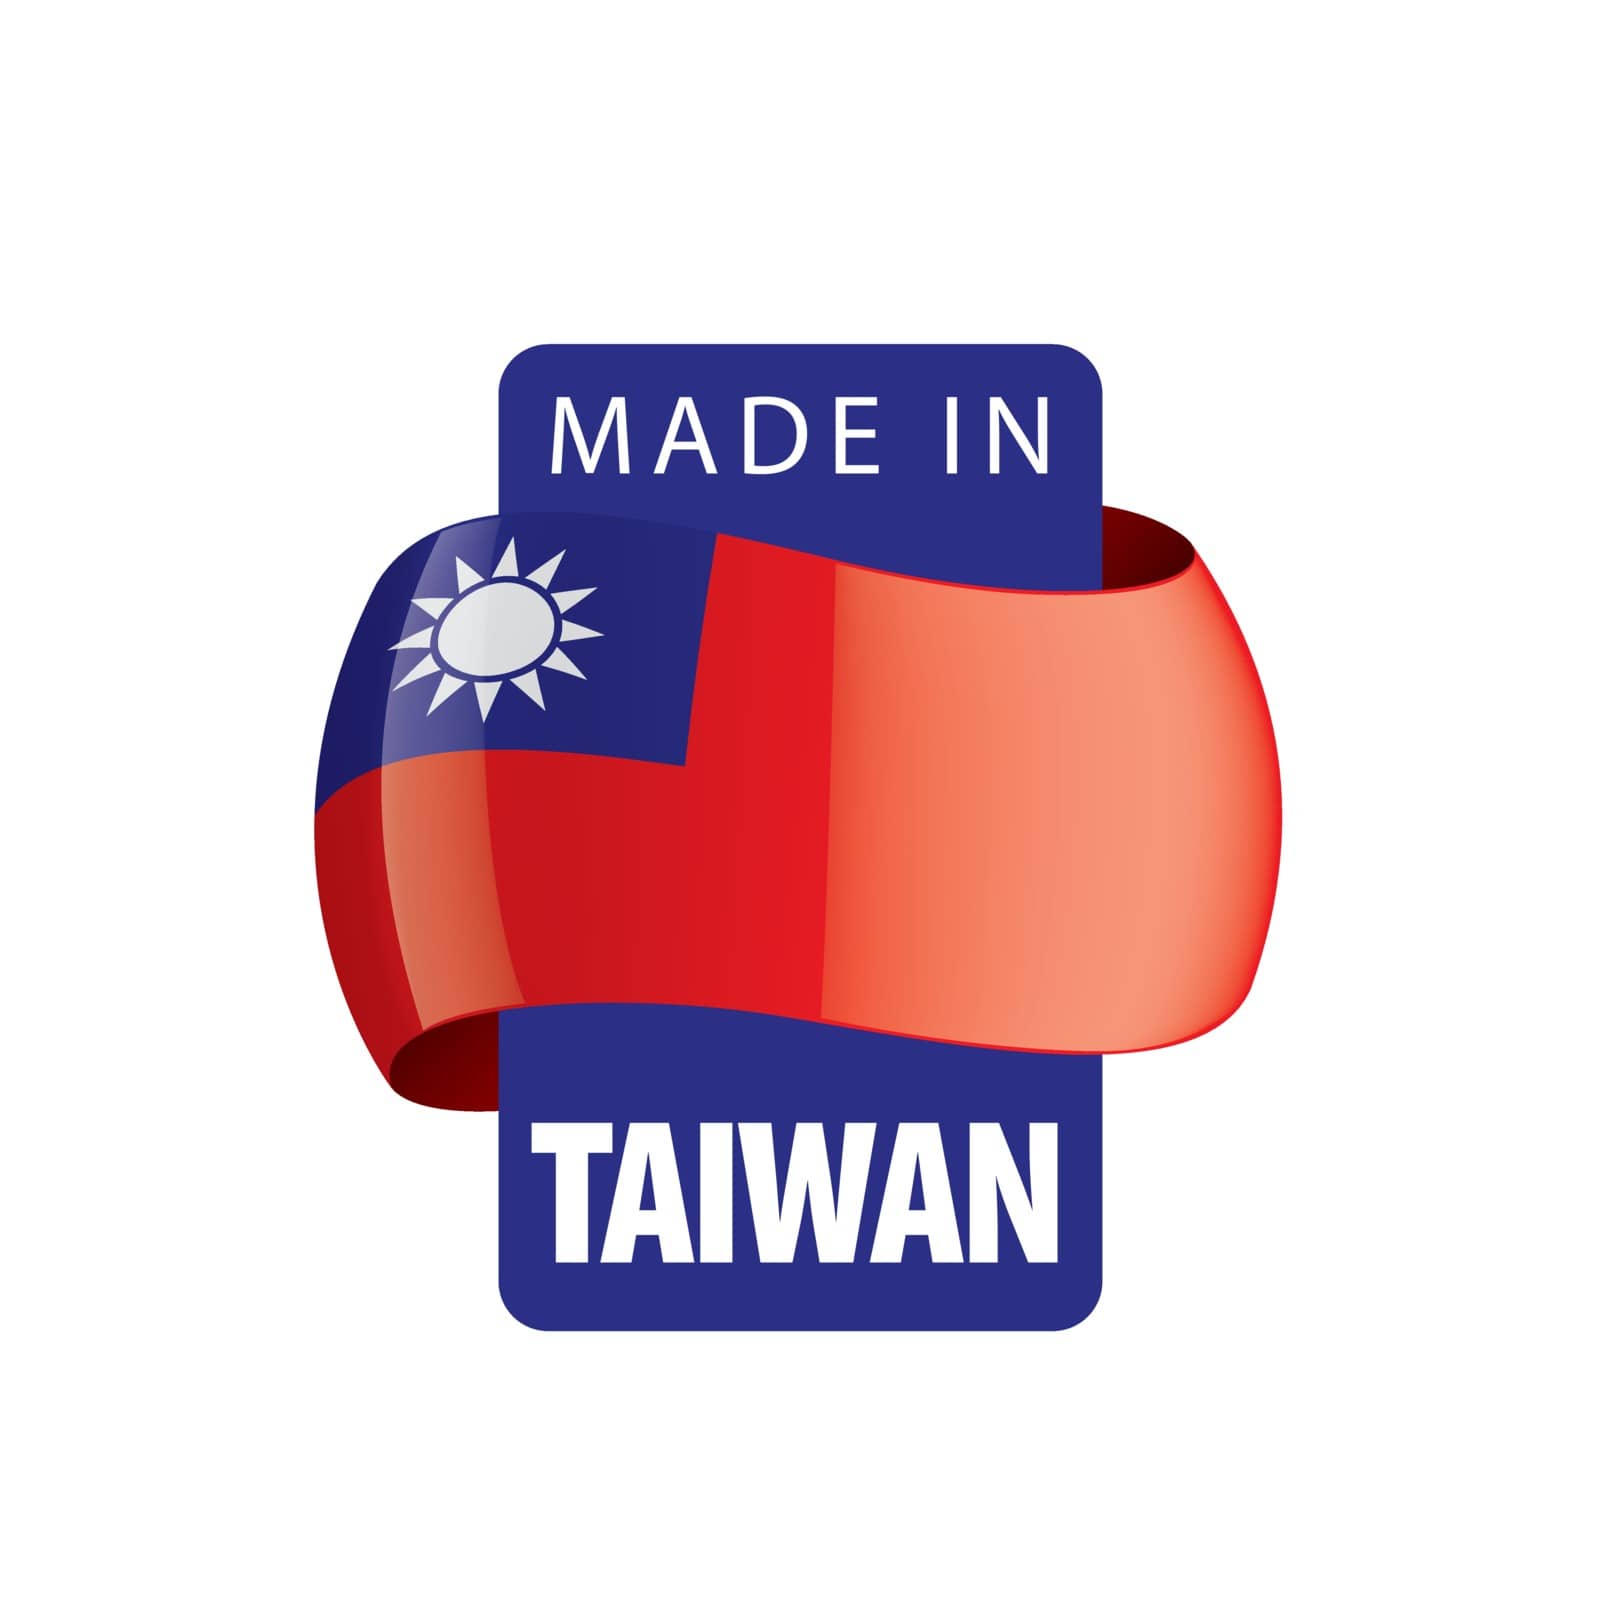 Taiwan flag, vector illustration on a white background.